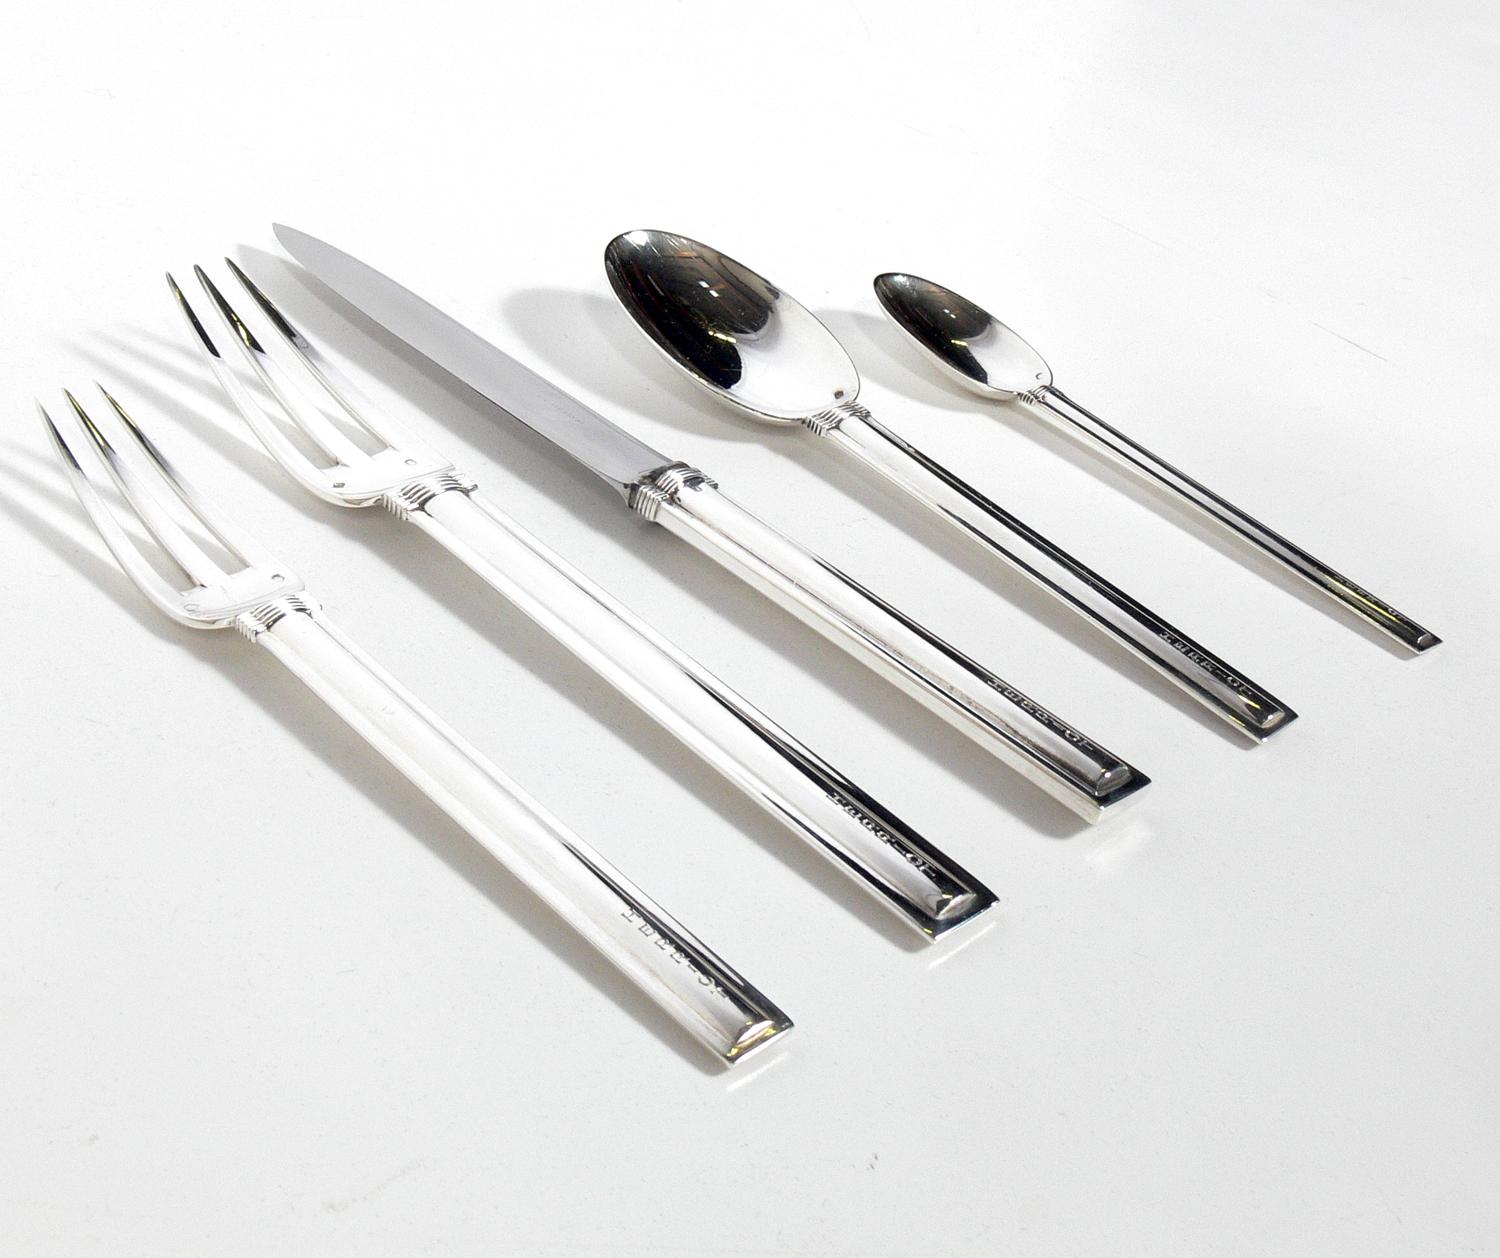 Rare Art Deco “Cannes” pattern silver flatware set, designed by Jean Puiforcat, France, circa 1930s. This set consists of the five pieces as shown. Each piece monogrammed HERRIOT. This can be removed at an additional charge if you prefer.